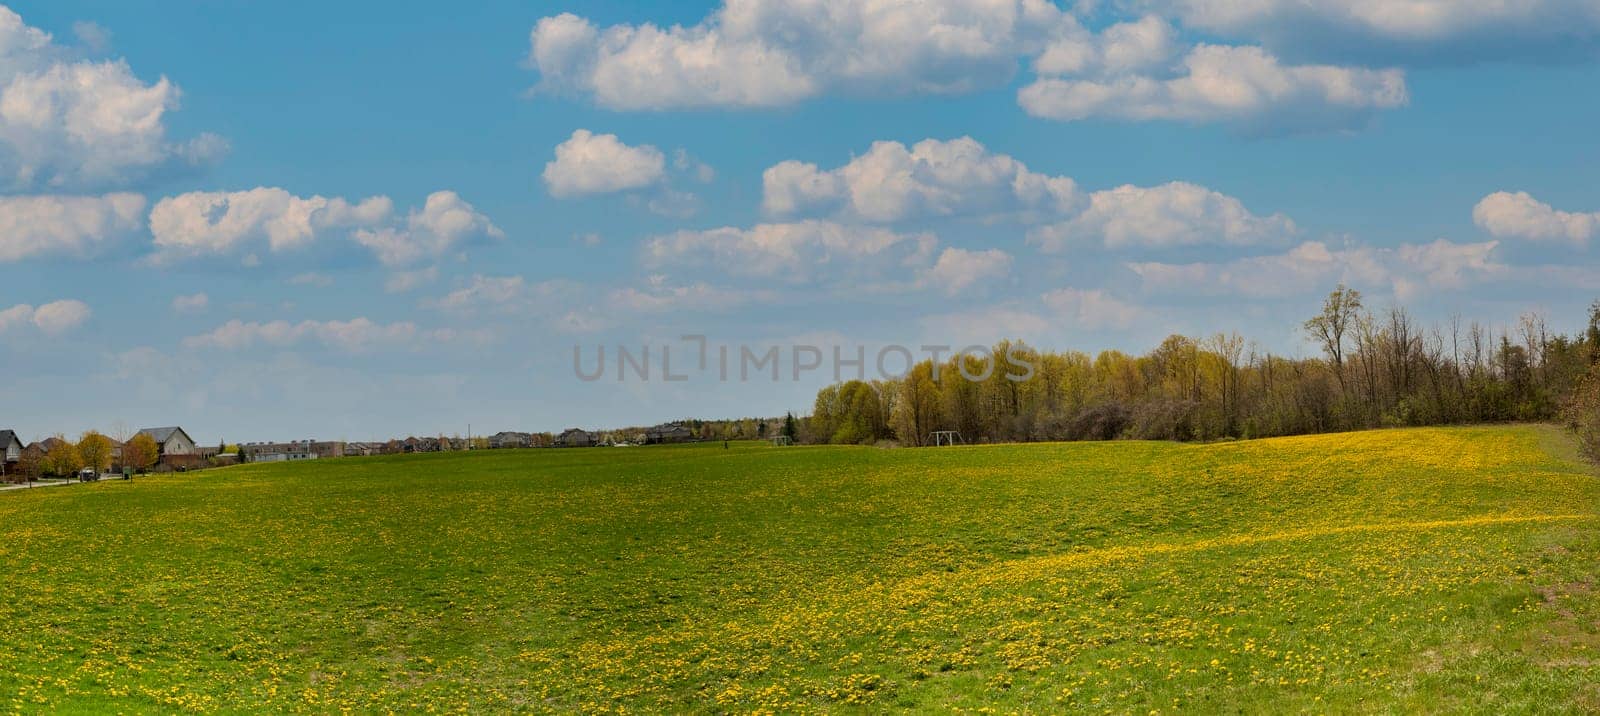 Yellow dandelions bloom on a green meadow under a blue sky with white clouds